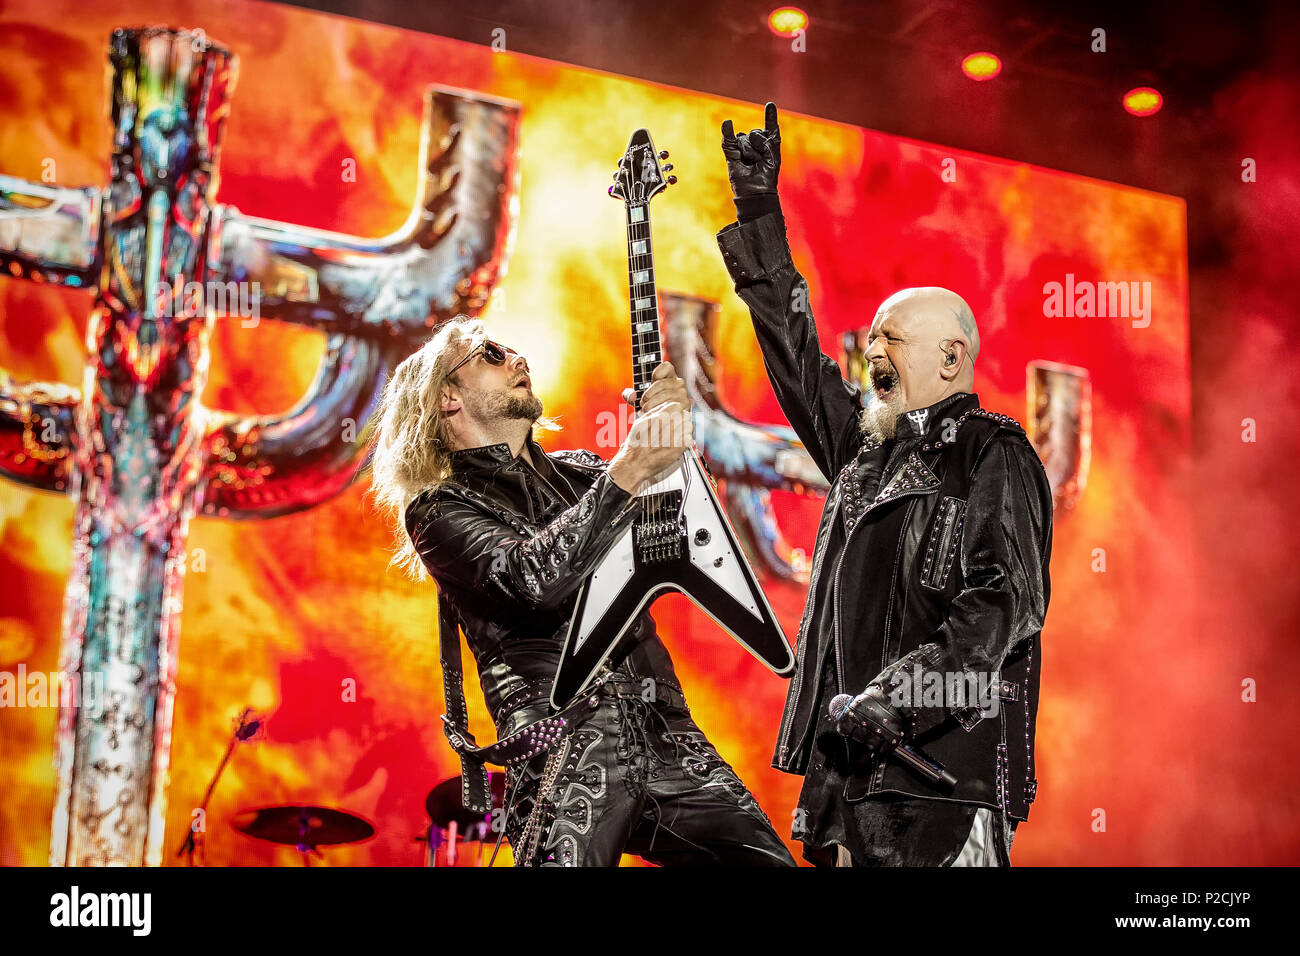 Sweden, Solvesborg - June 09, 2018. The English heavy metal band Judas Priest performs a live concert during the Swedish music festival Sweden Rock Festival 2018. Here vocalist Rob Halford is seen live on stage with guitarist Richie Faulkner. (Photo credit: Gonzales Photo - Terje Dokken). Stock Photo